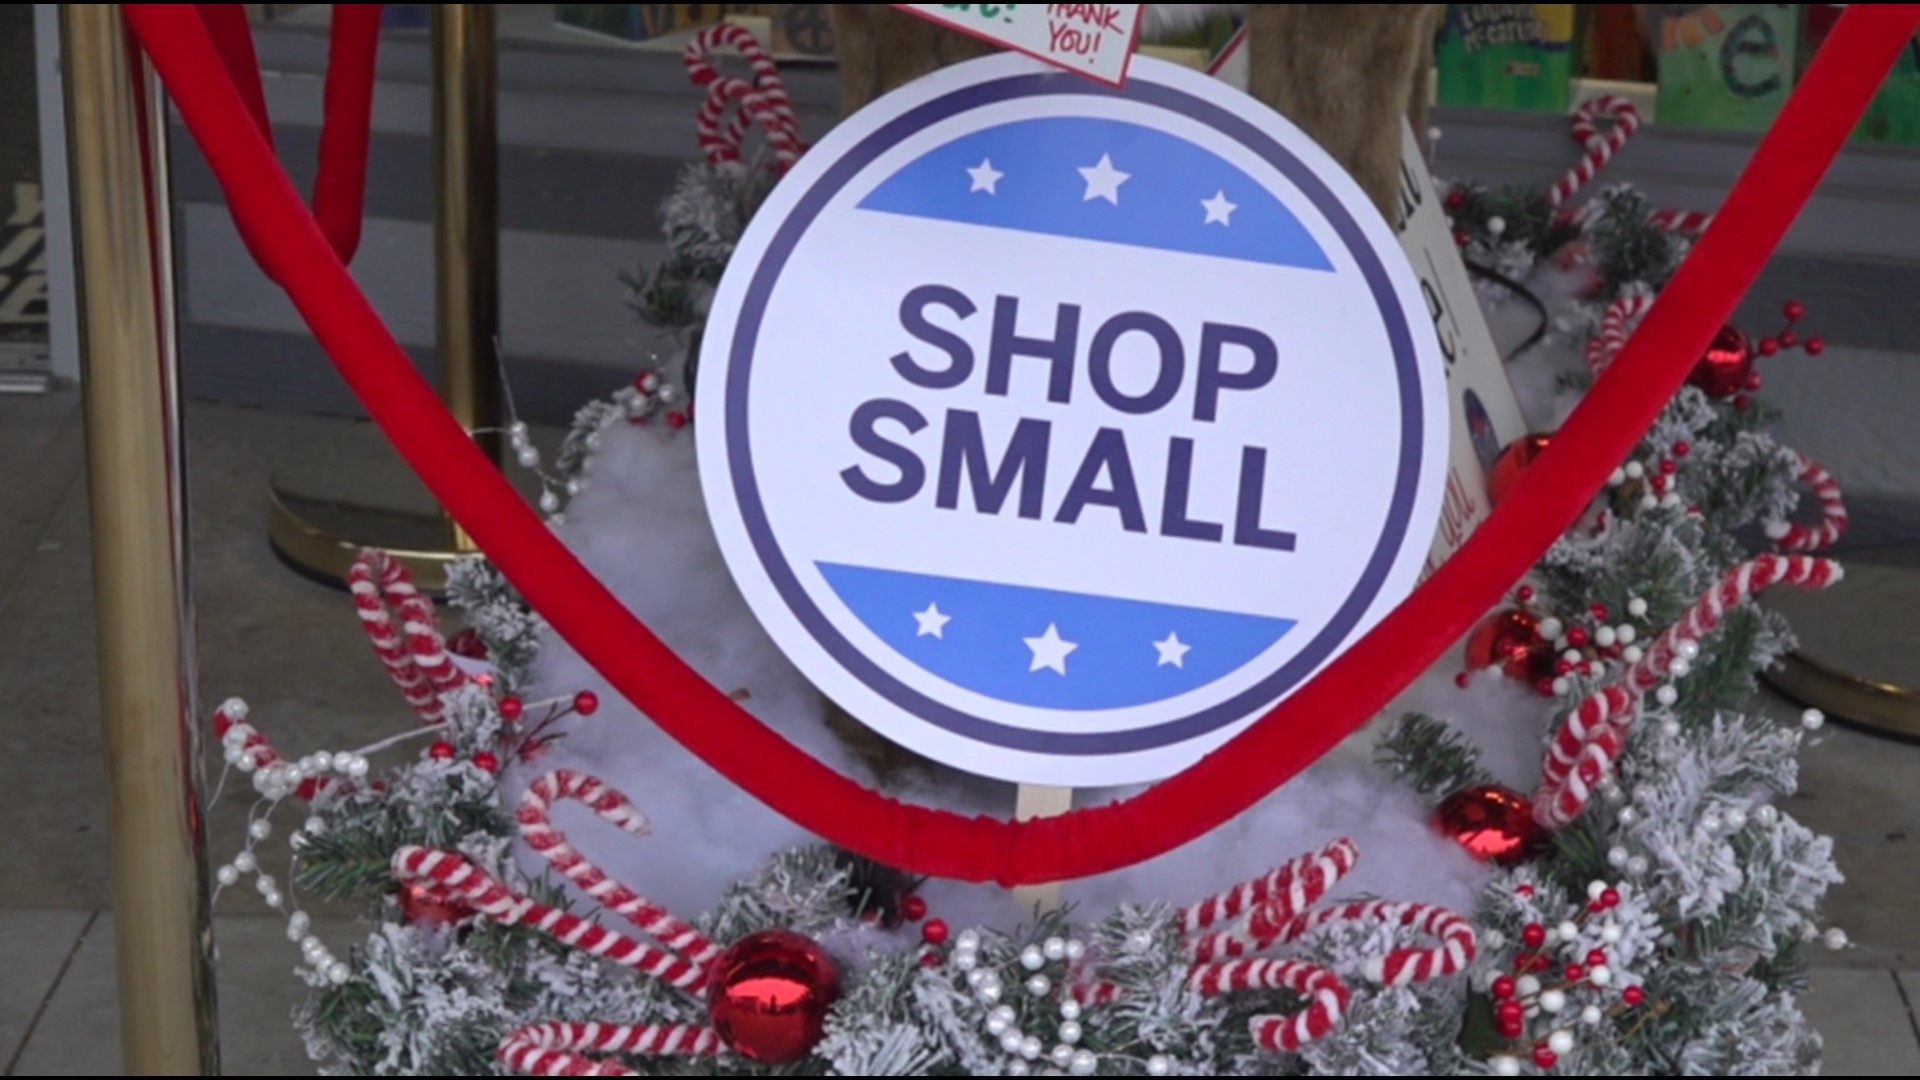 Locally-owned businesses in Des Moines told Local 5 that Small Business Saturday is their best business day of the year.